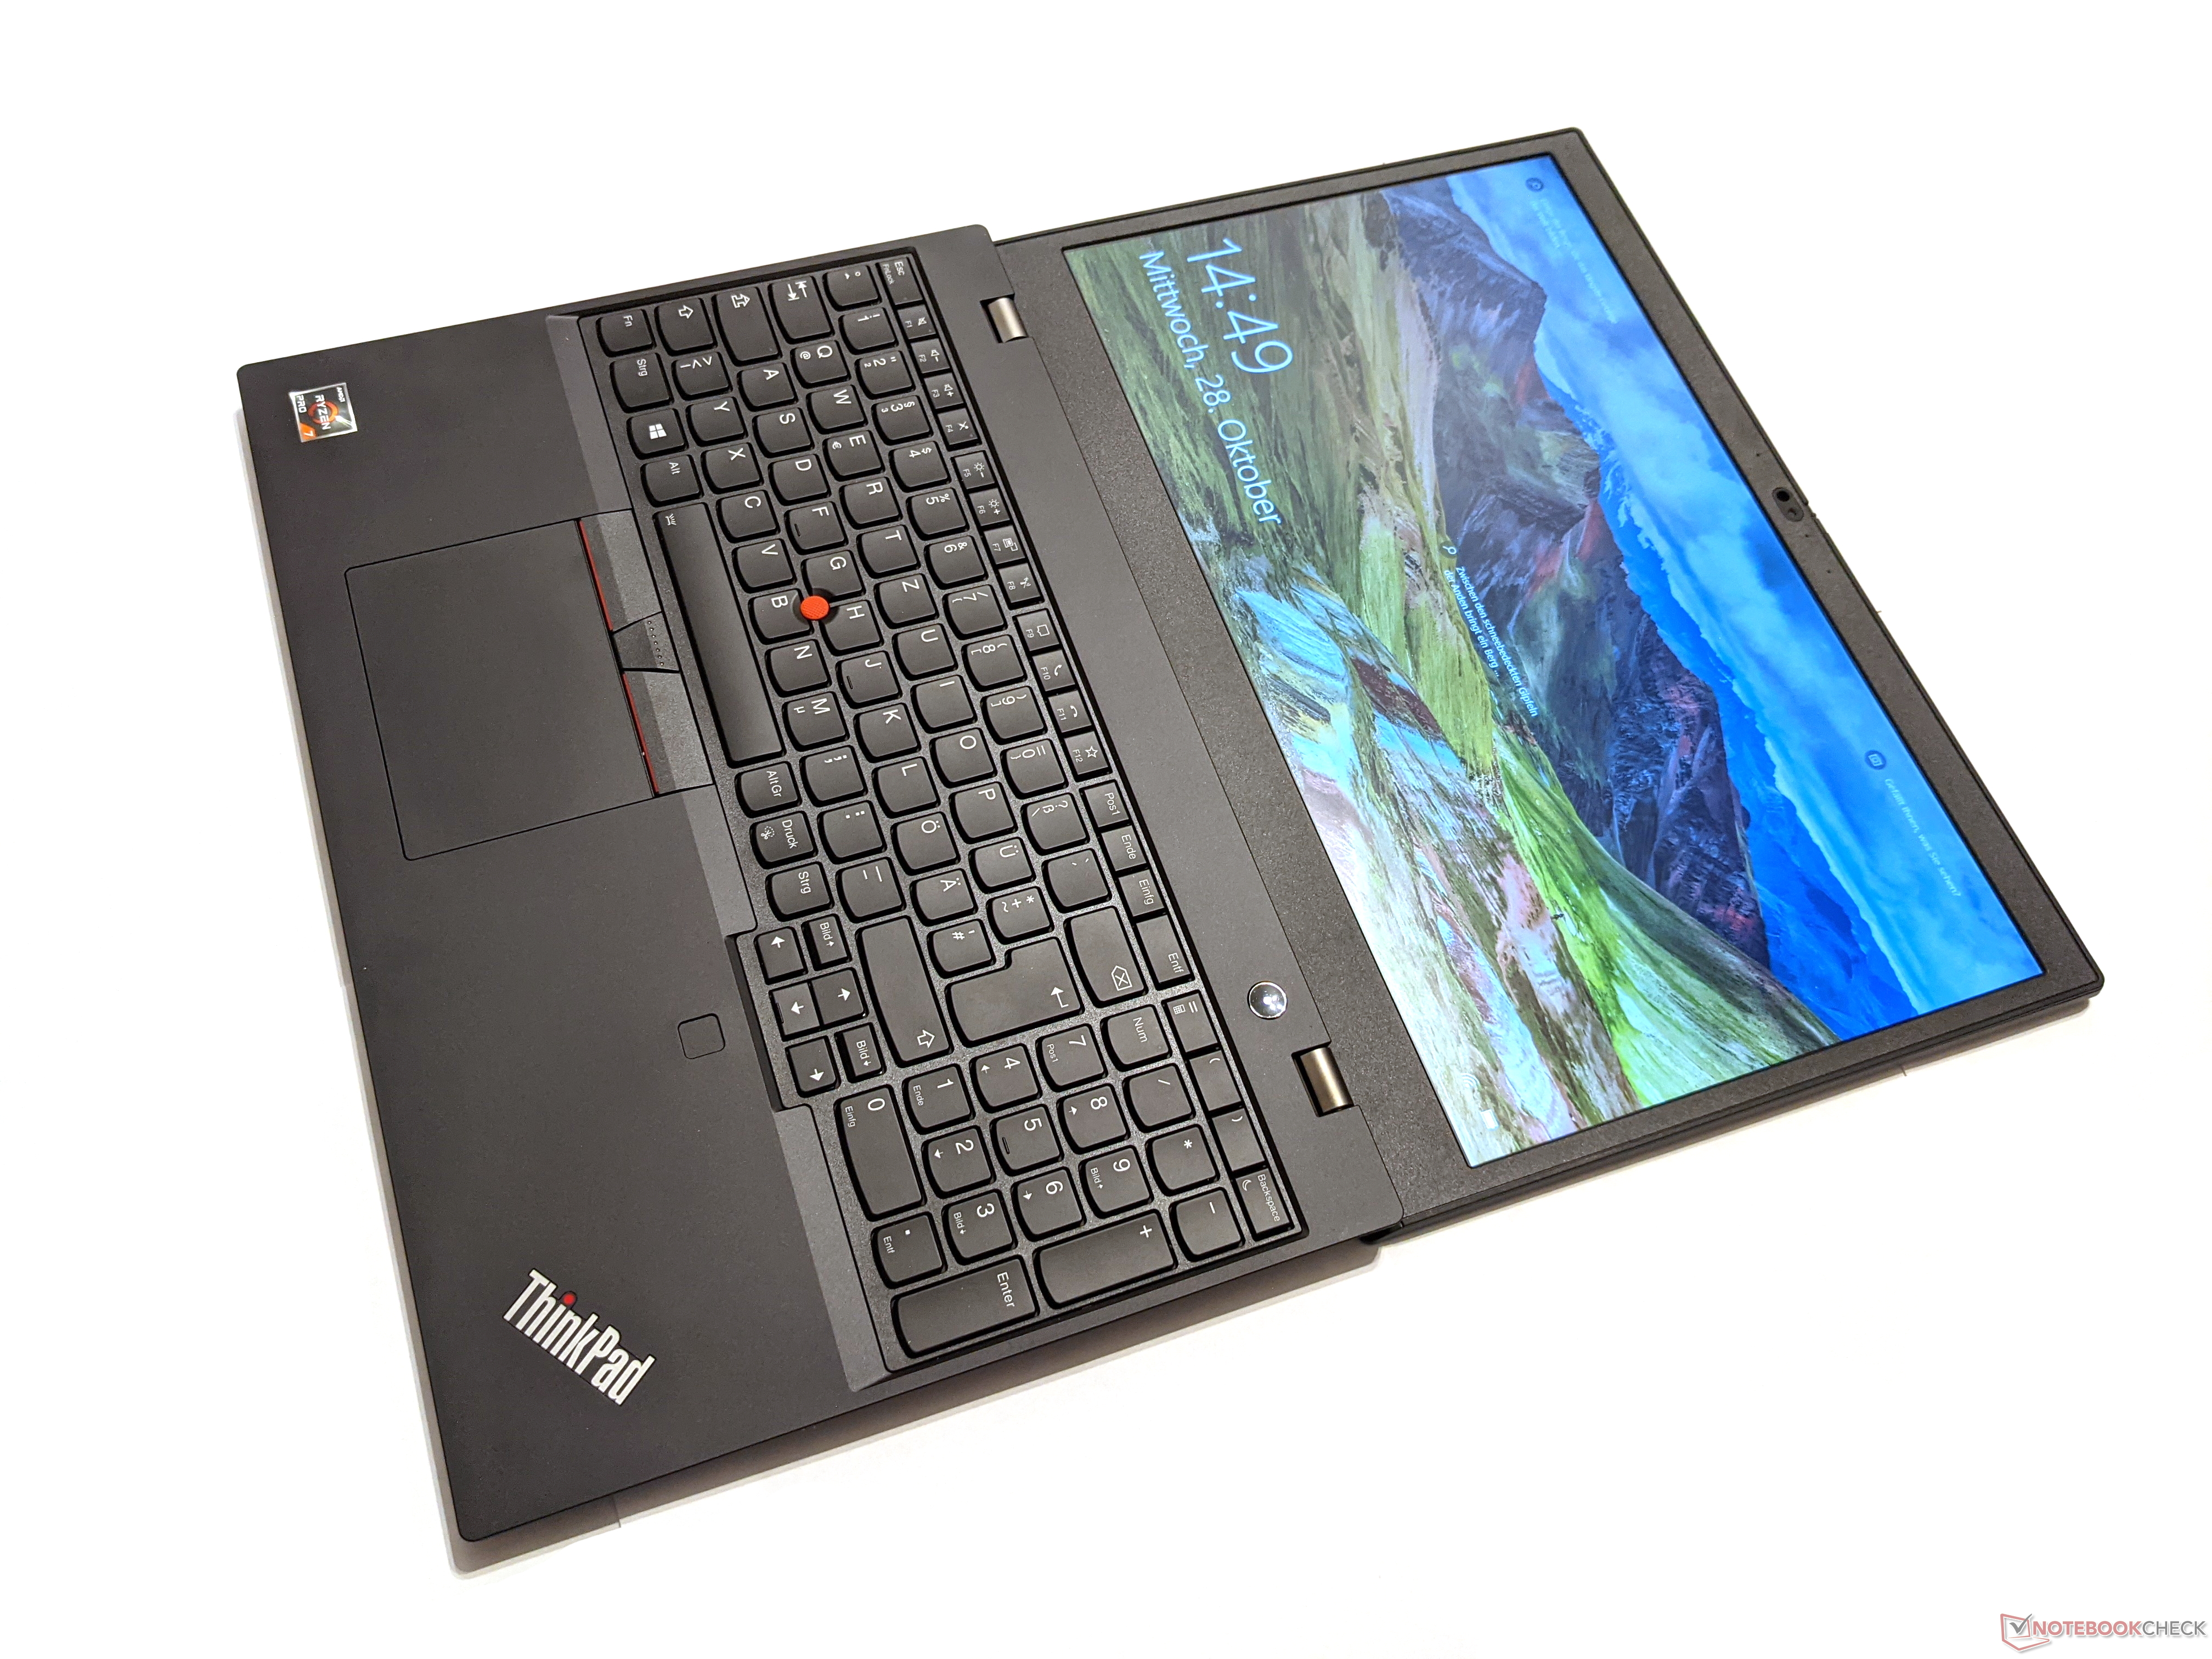 Lenovo thinkpad l15 notebookcheck for the win two steps from hell